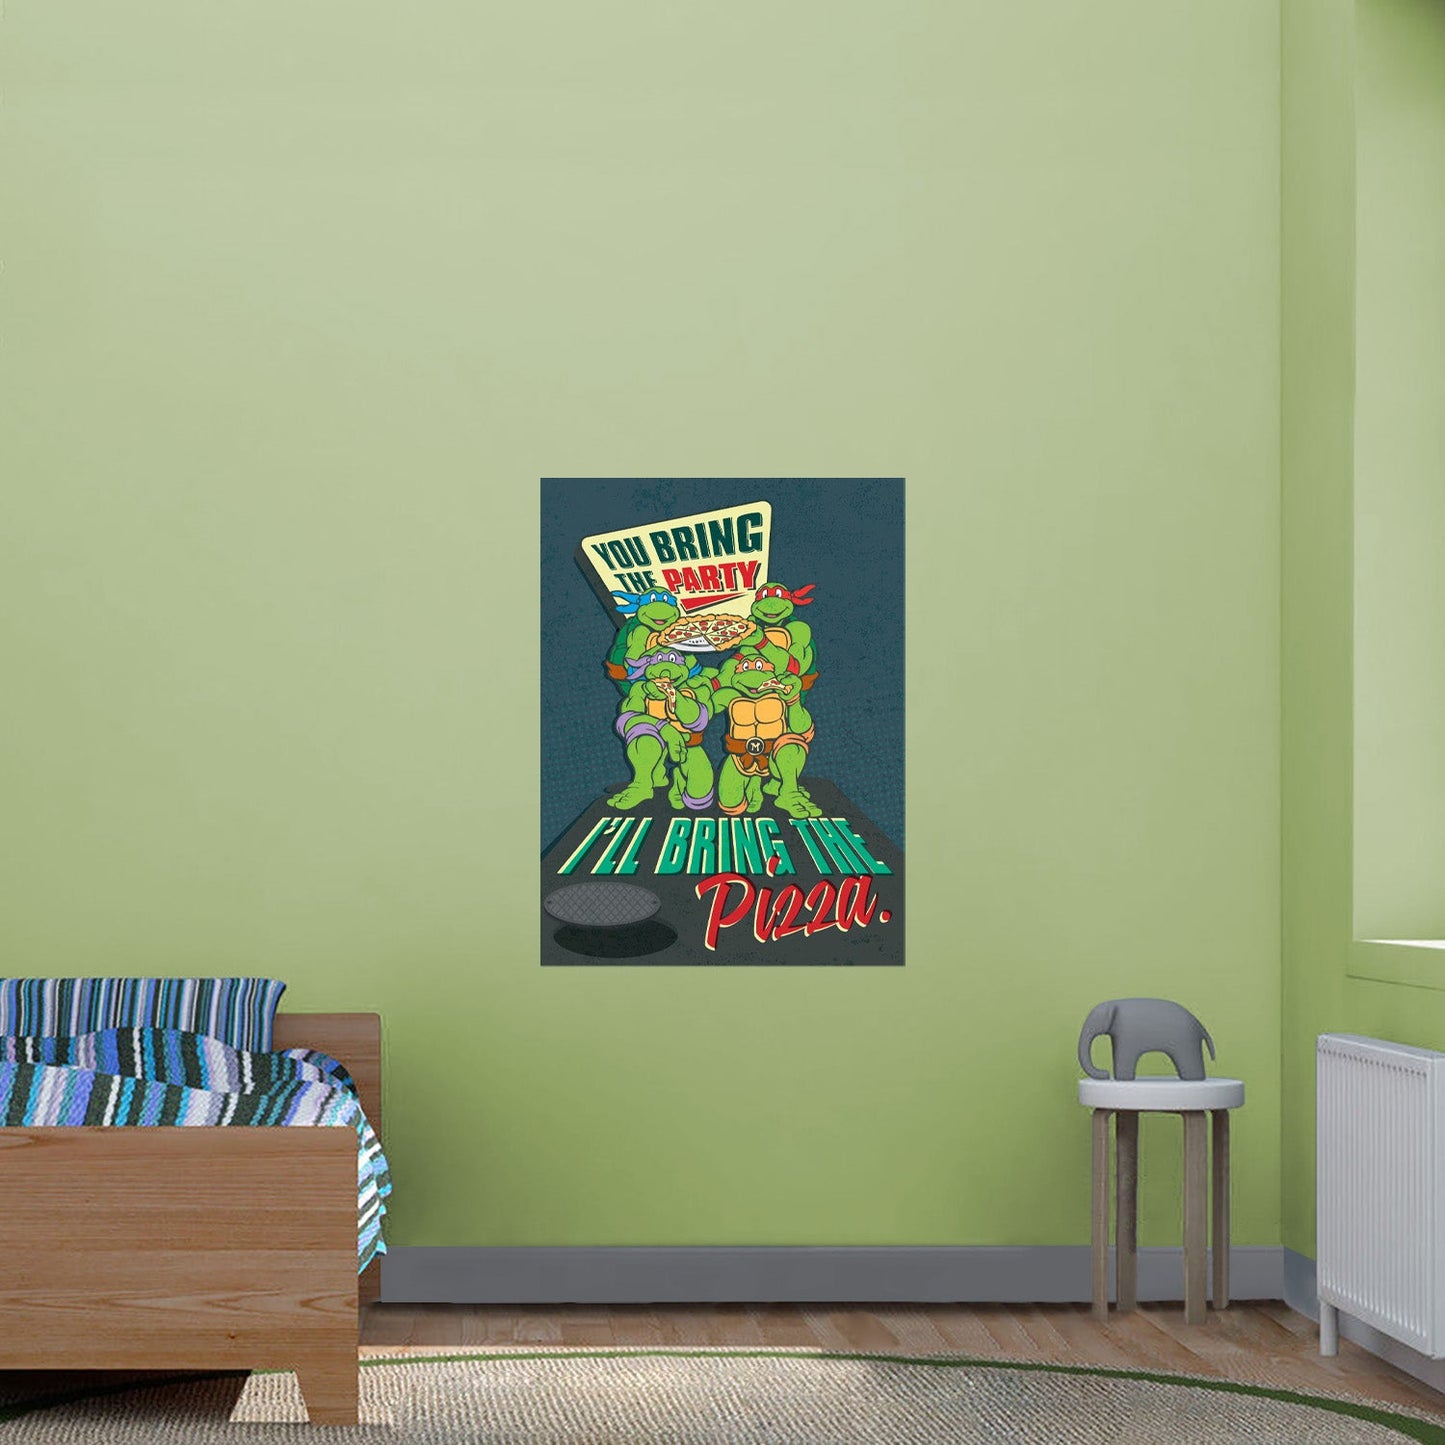 Teenage Mutant Ninja Turtles: Bring the Party Poster - Officially Licensed Nickelodeon Removable Adhesive Decal